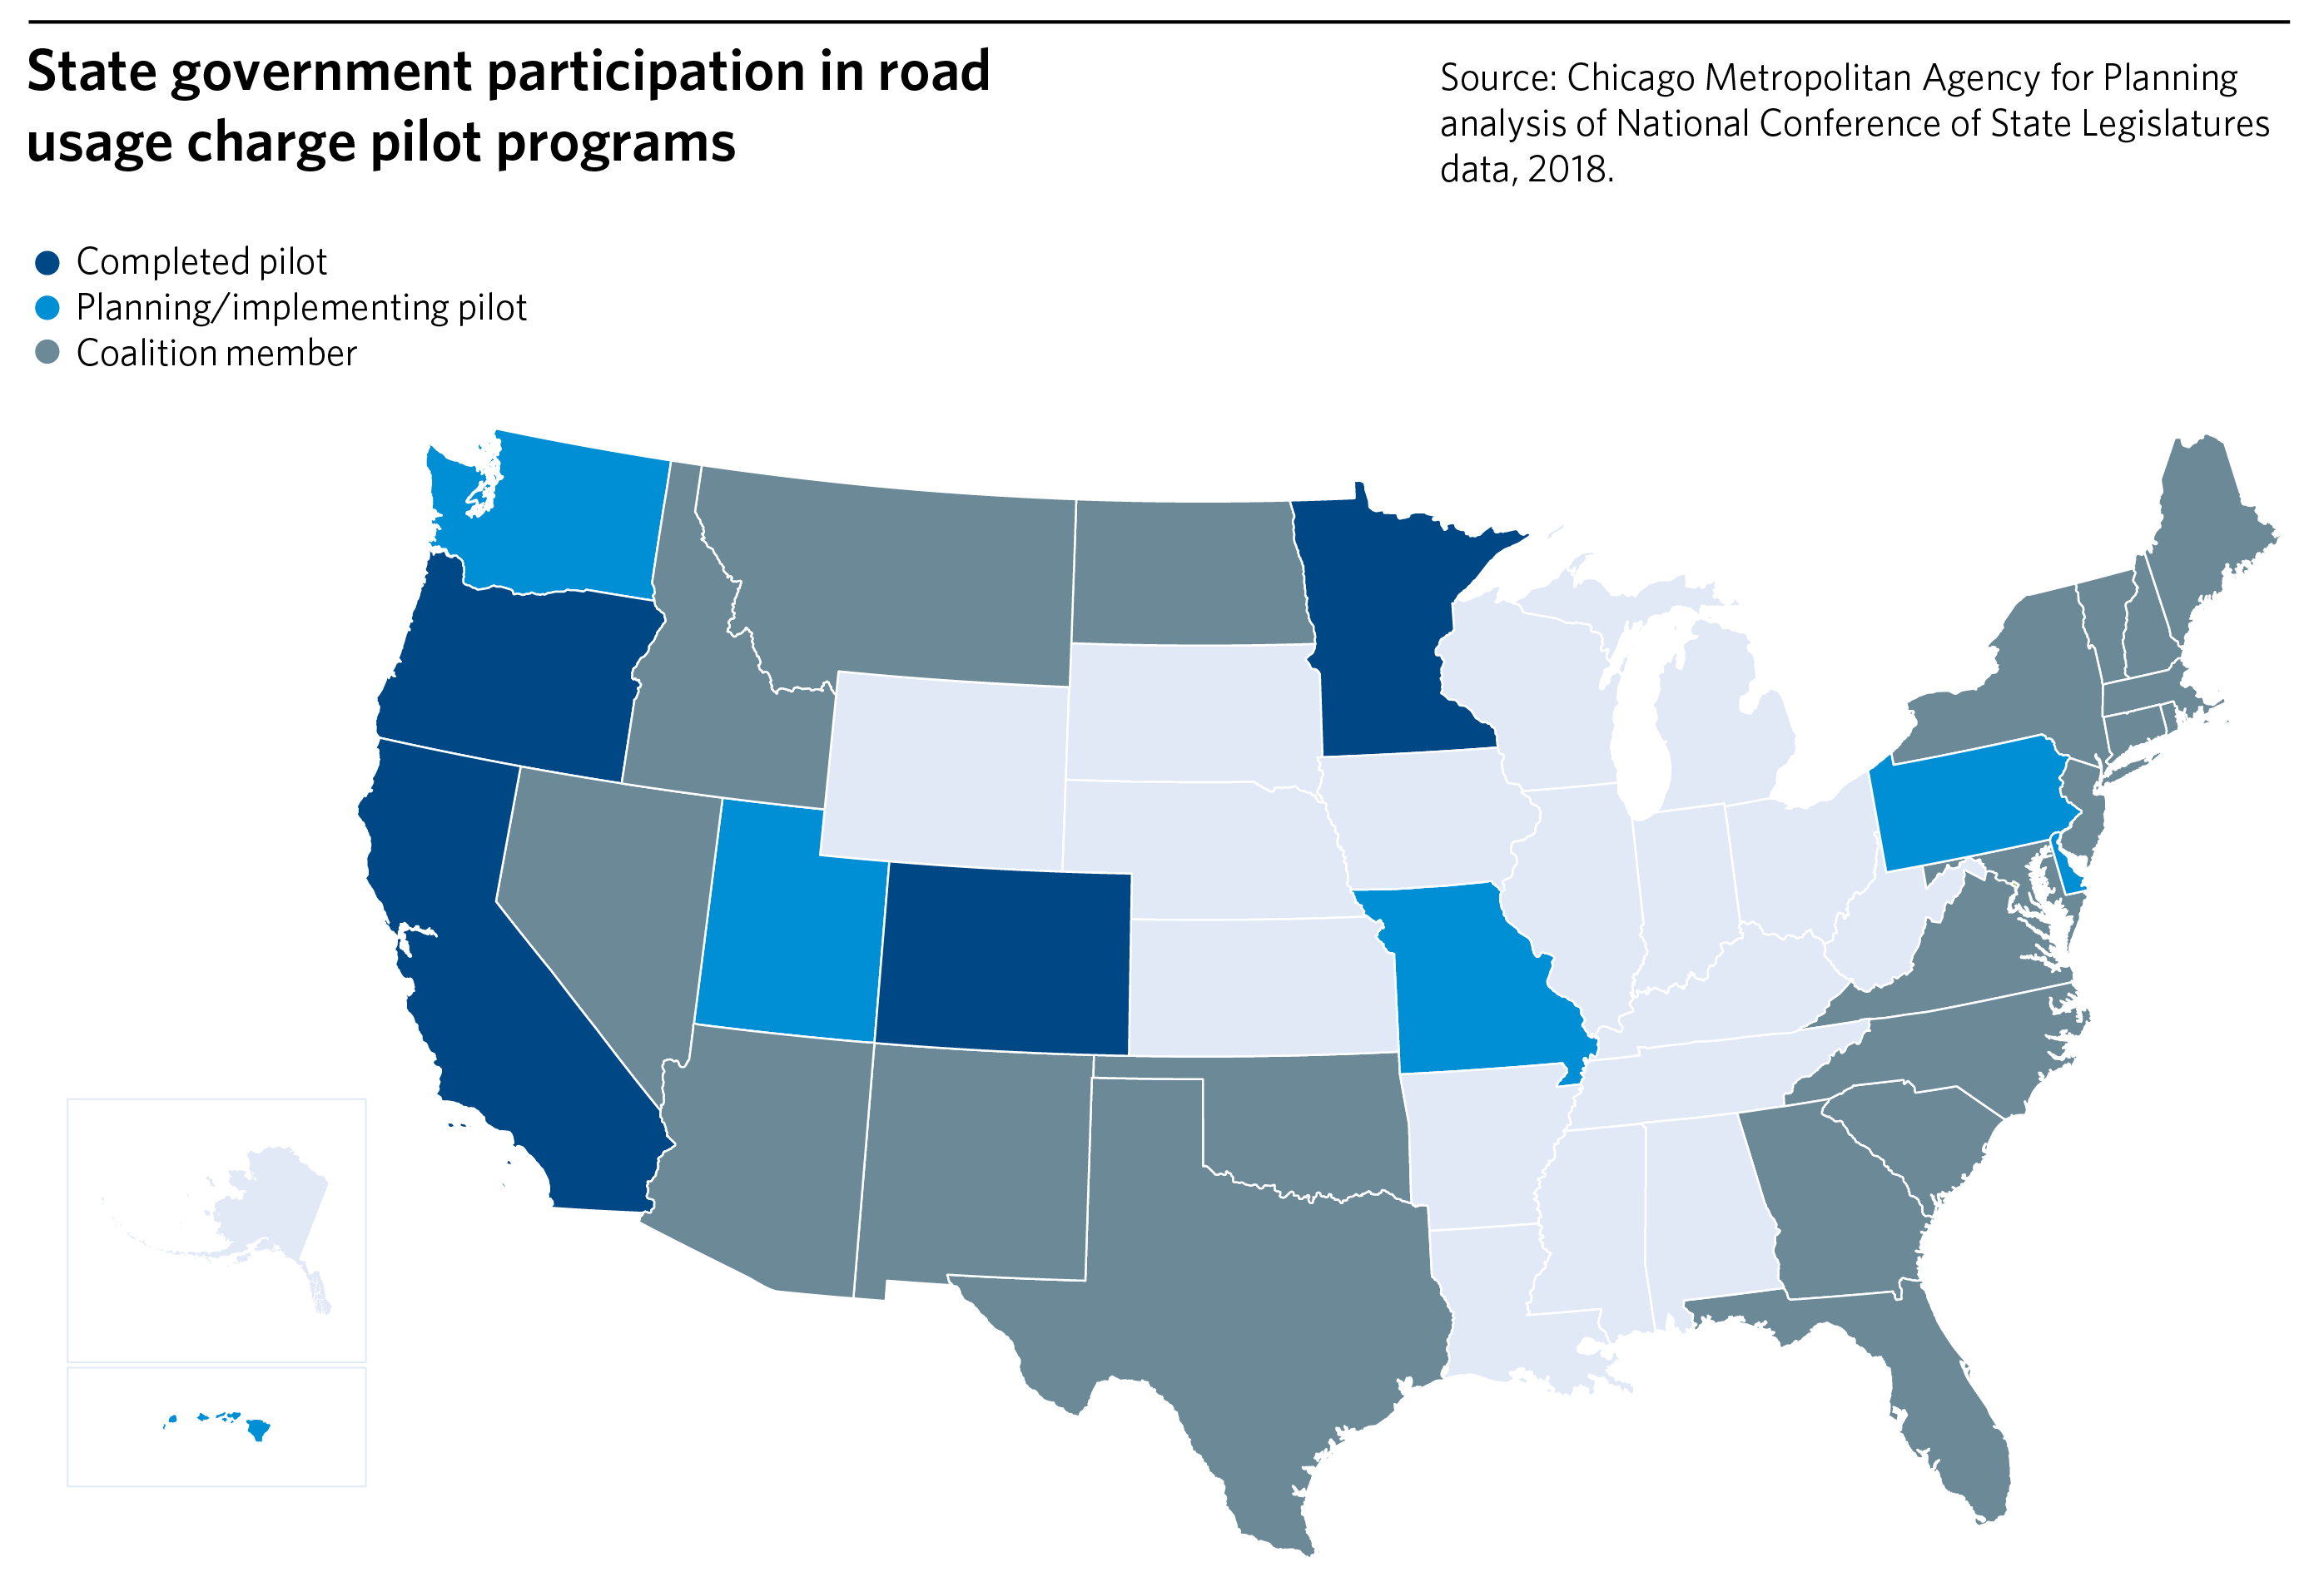 State government participation in road usage charge pilot programs map